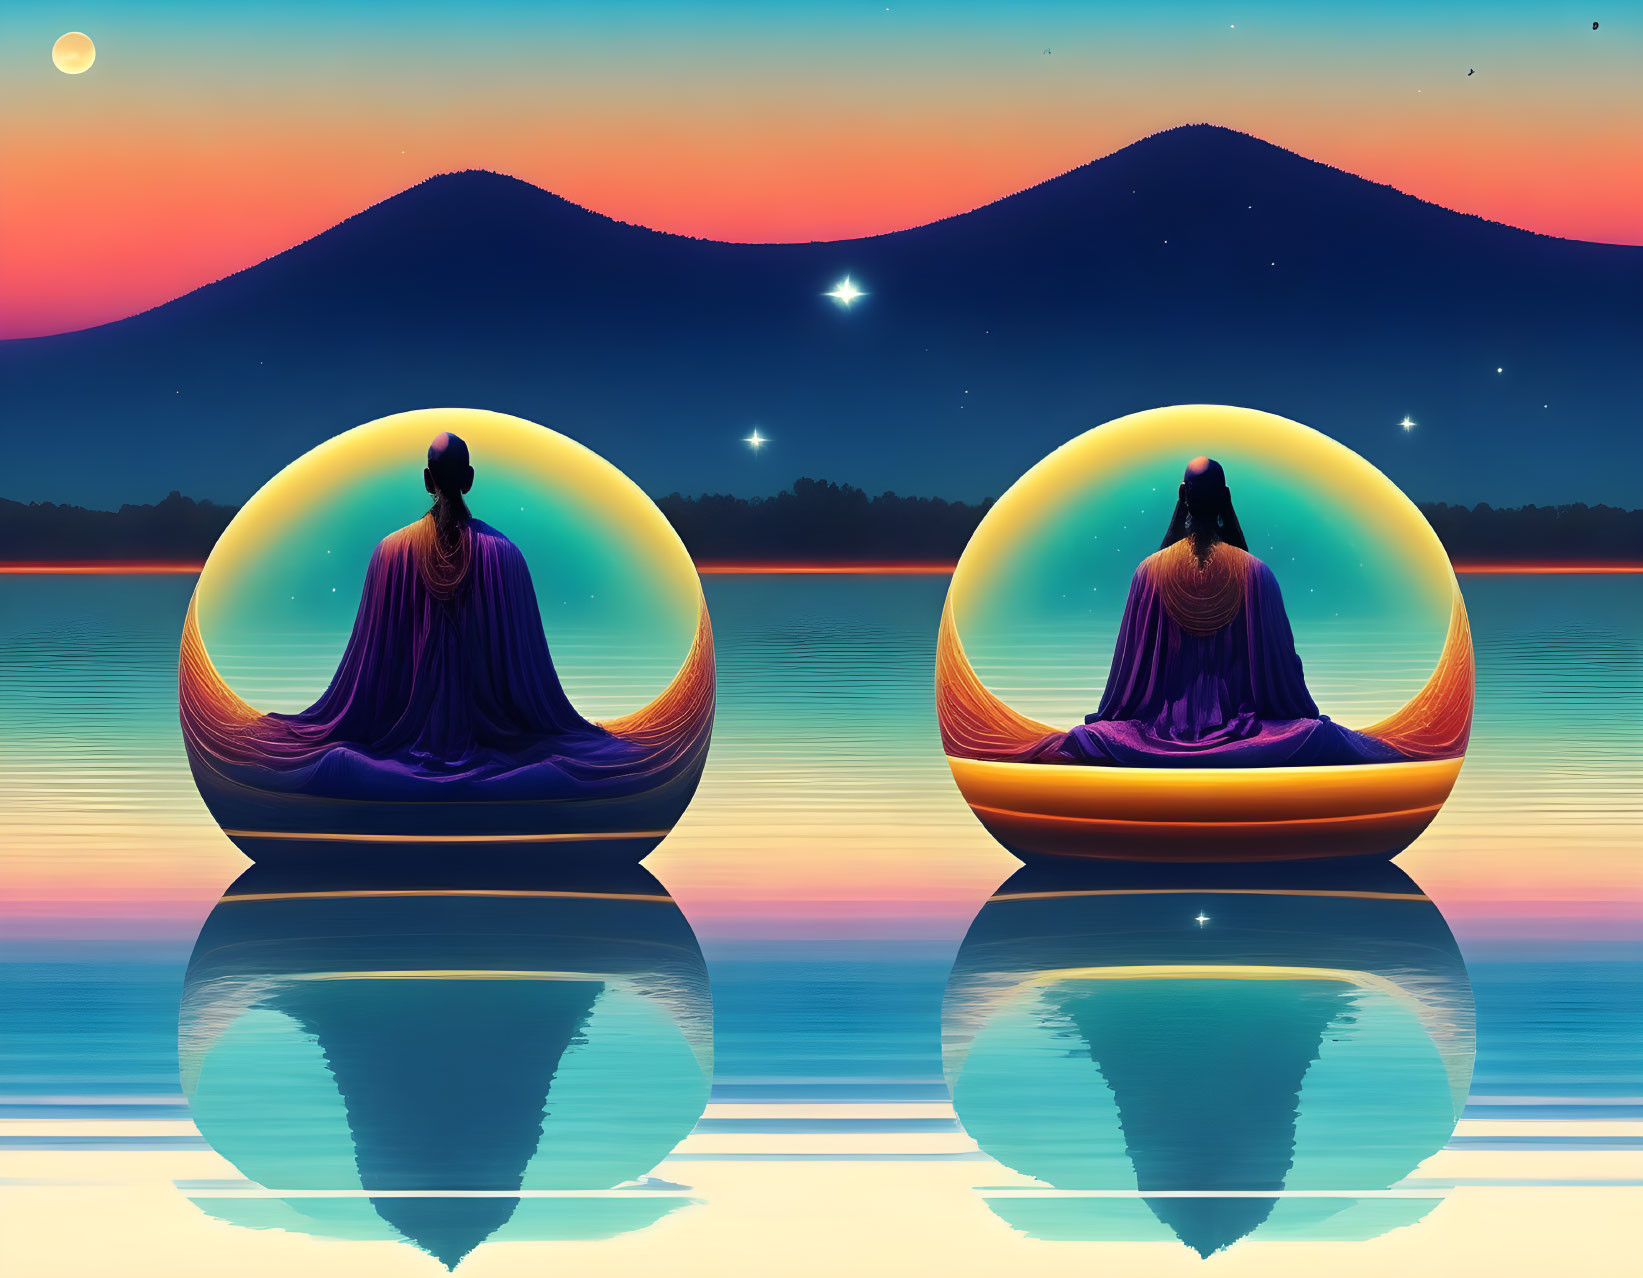 Silhouetted figures in glowing orbs on tranquil lake with mountains reflected at twilight